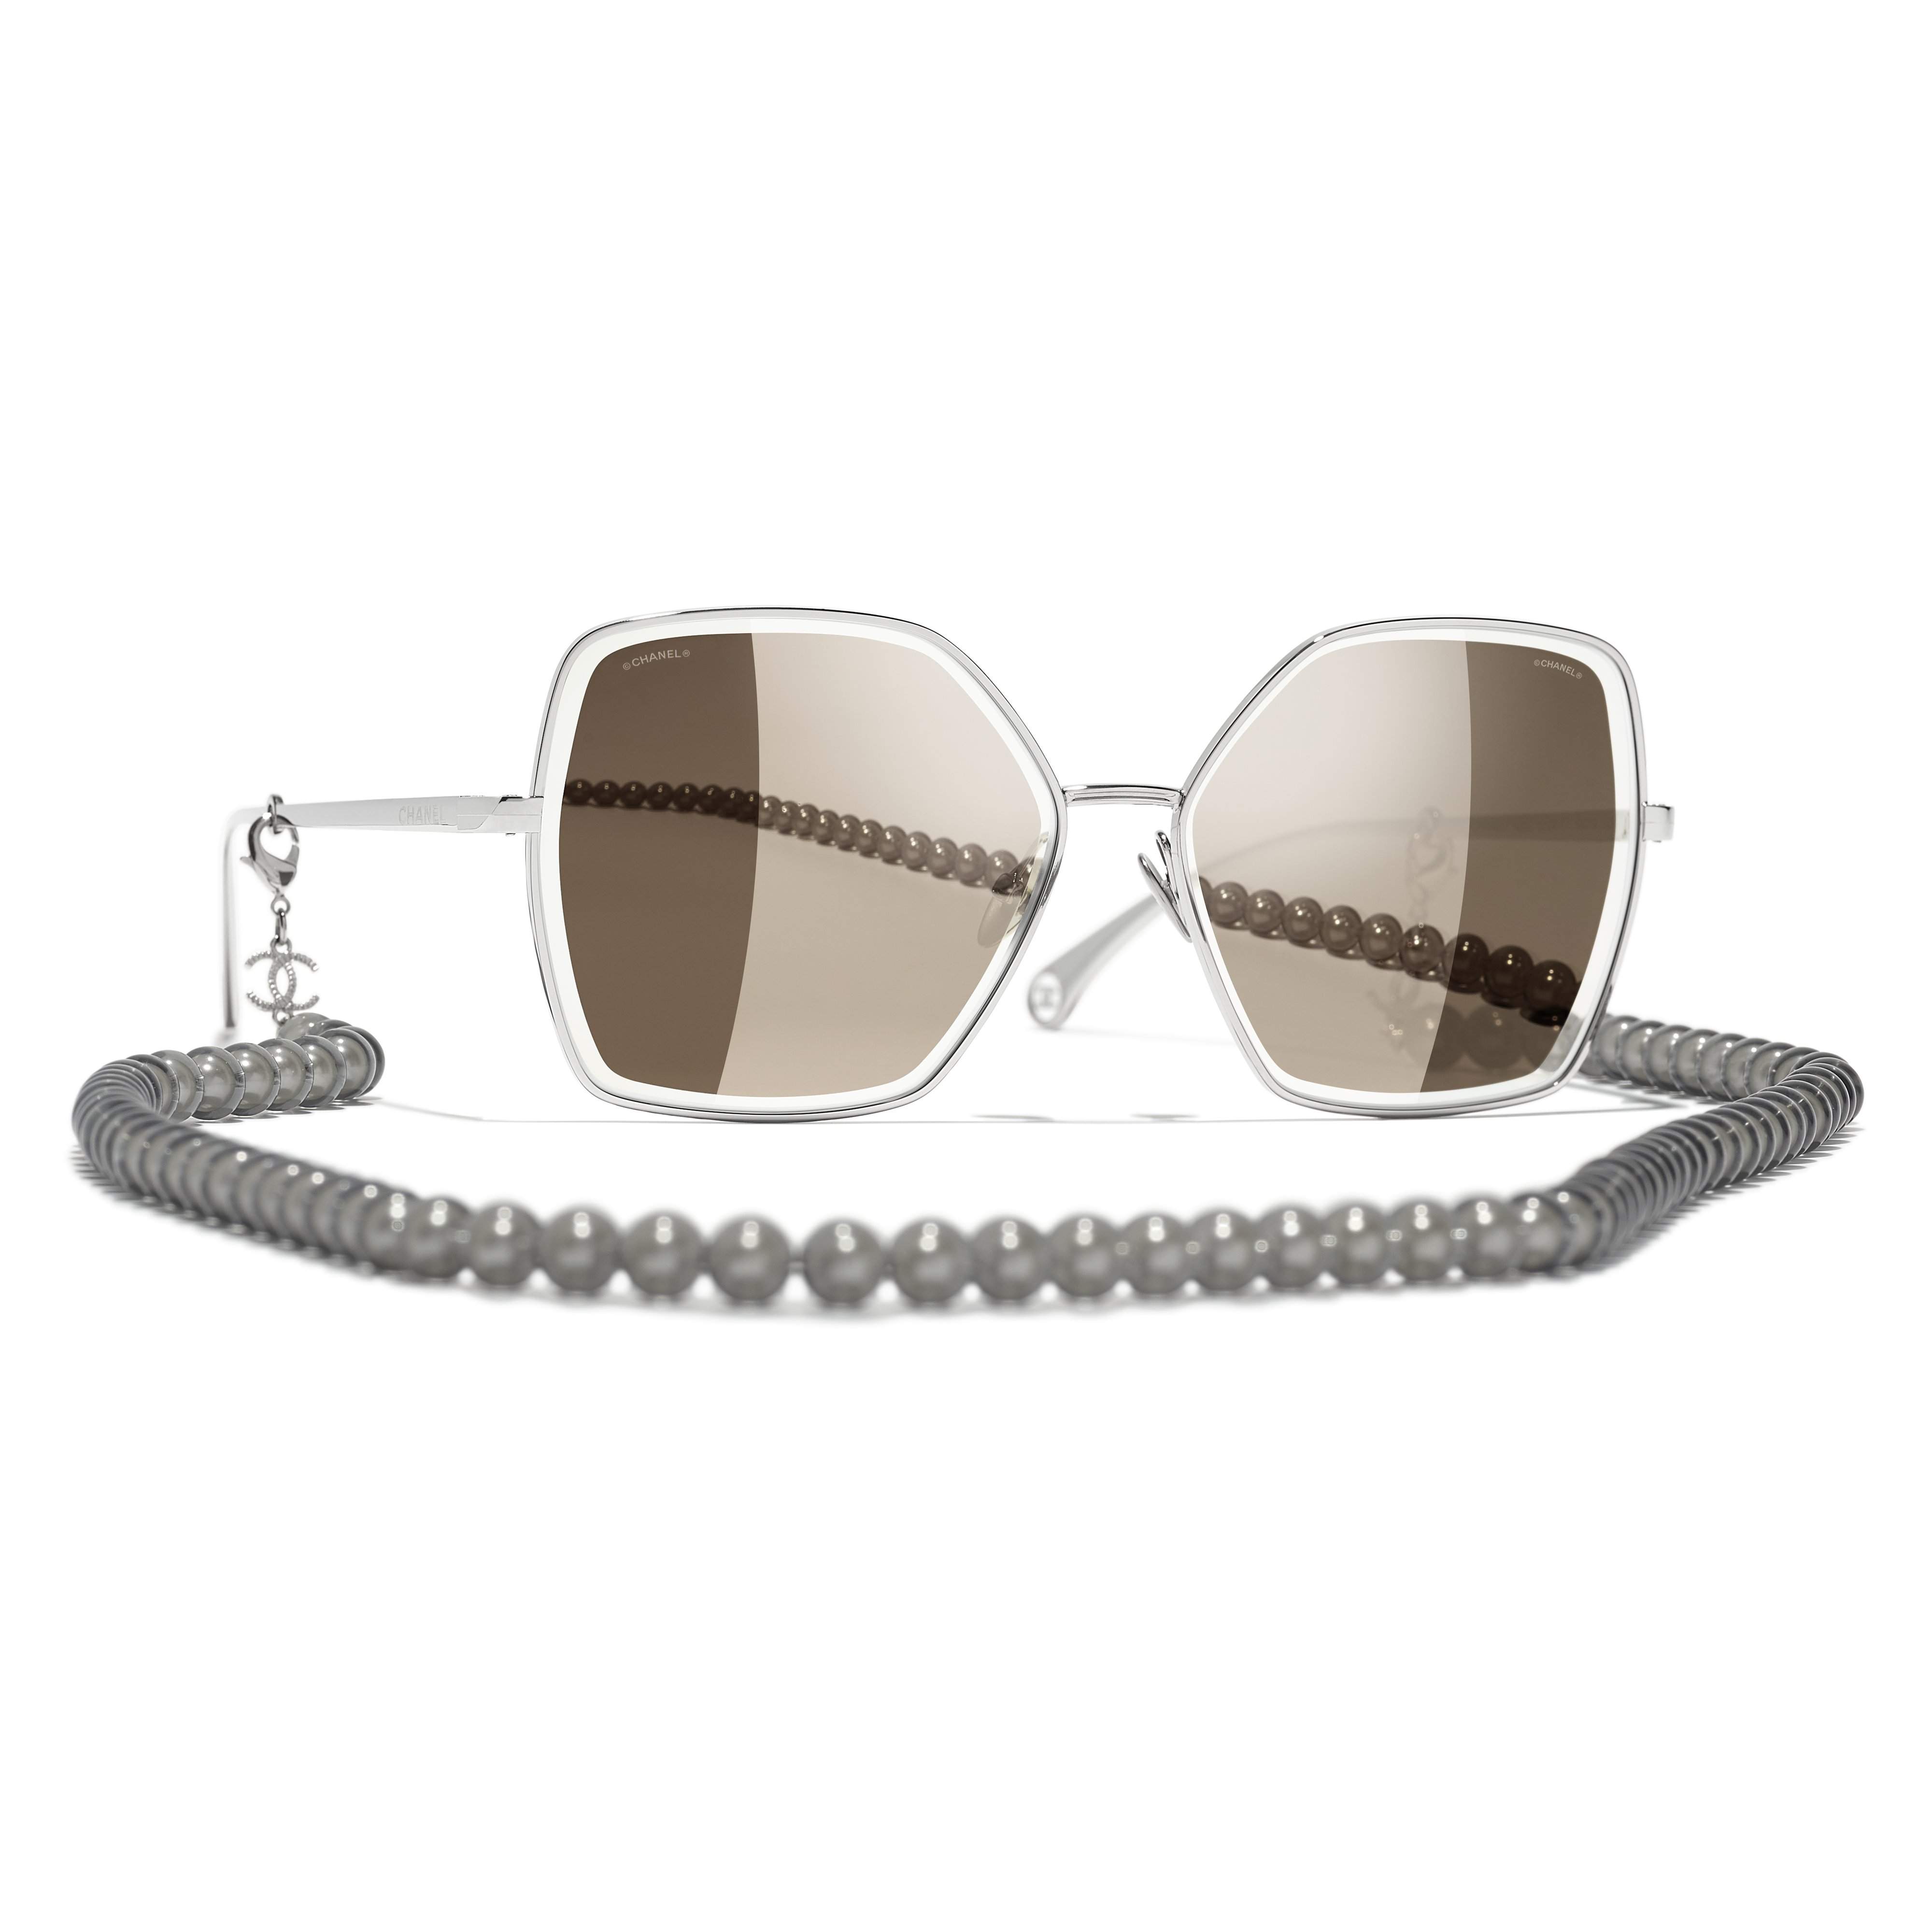 Chanel Round Sunglasses  Taylor Swifts New Music Video Put Me on the Hunt  For a Pair of Embellished Sunglasses  POPSUGAR Fashion Photo 12